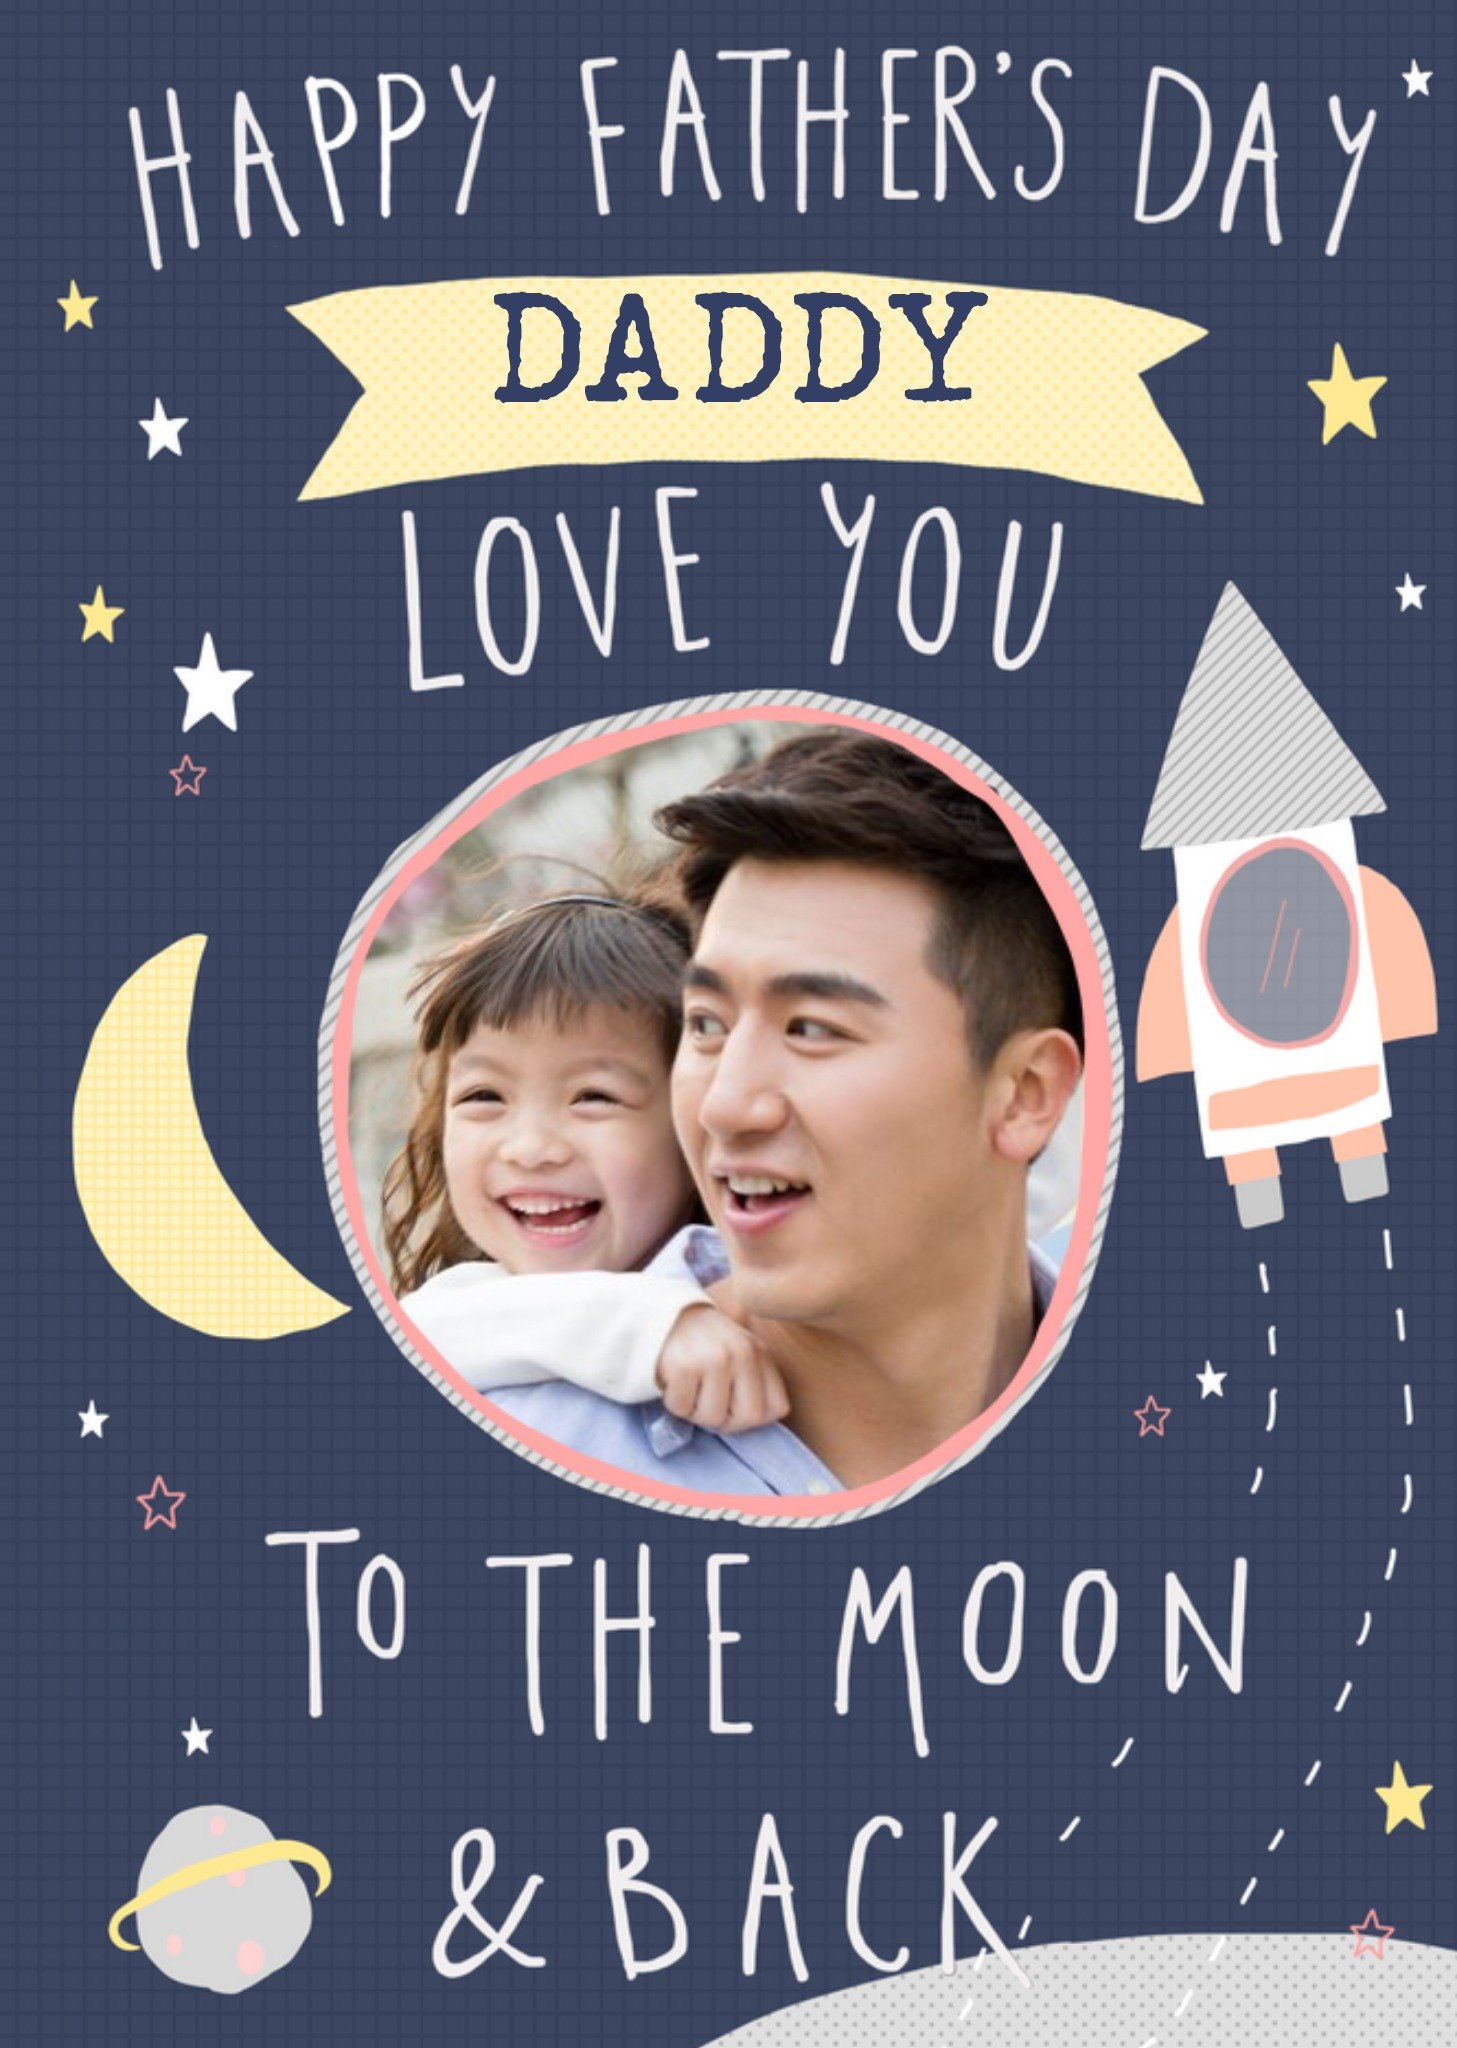 Moonpig Daddy Love You To The Moon & Back Cute Father's Day Photo Card Ecard